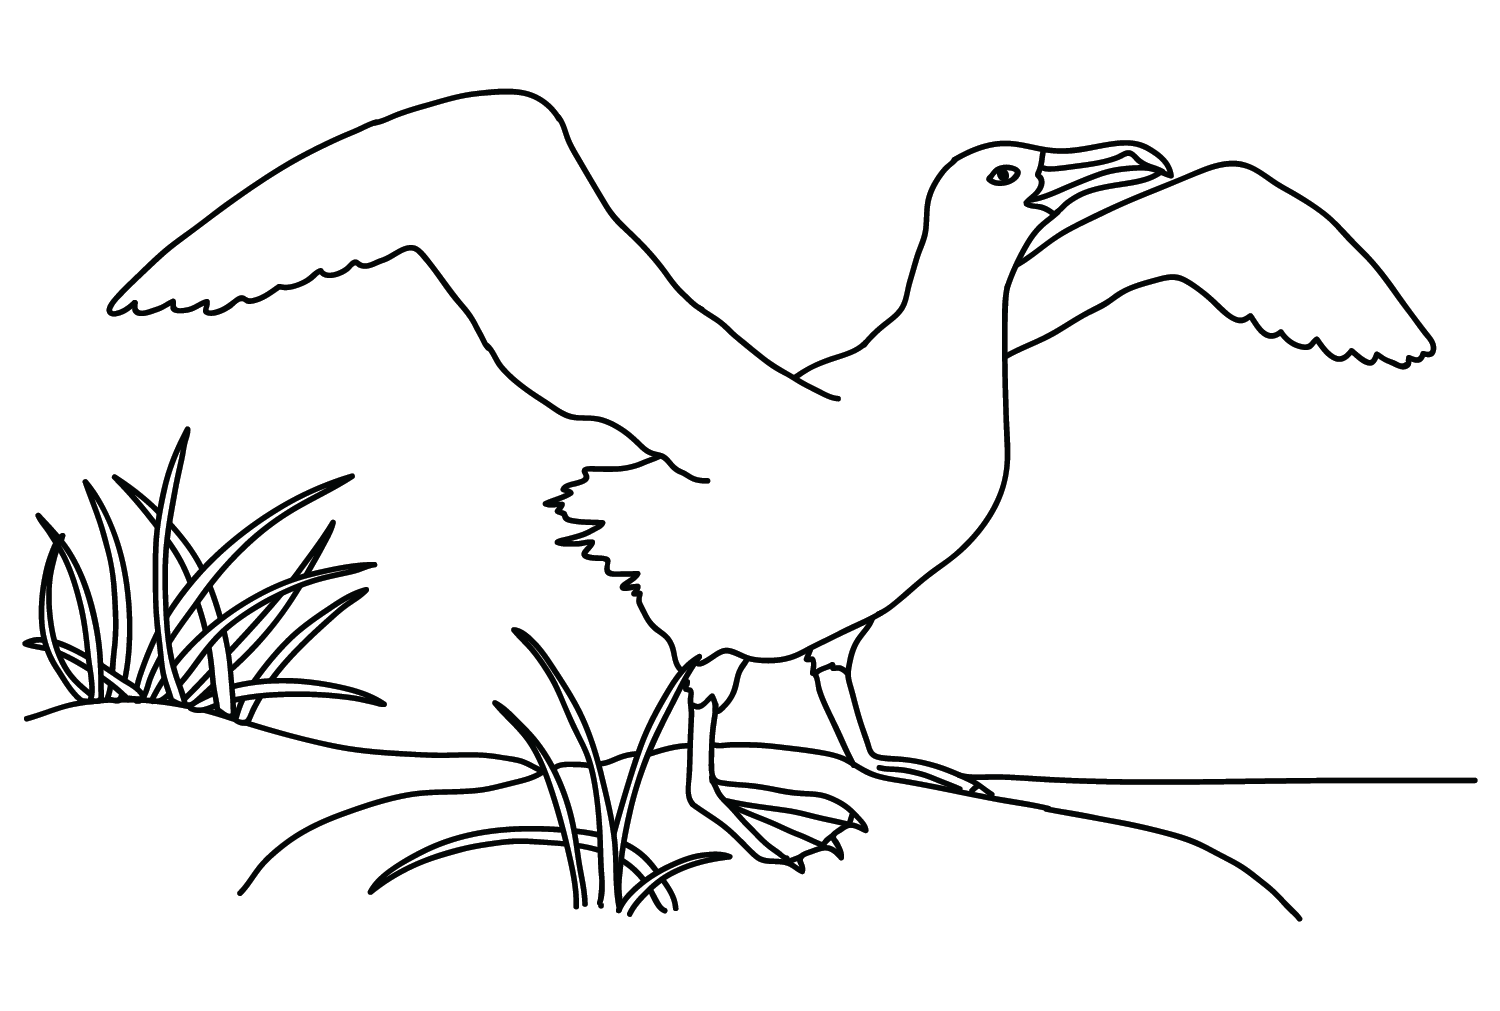 Albatross Coloring Page Free Printable from Albatross